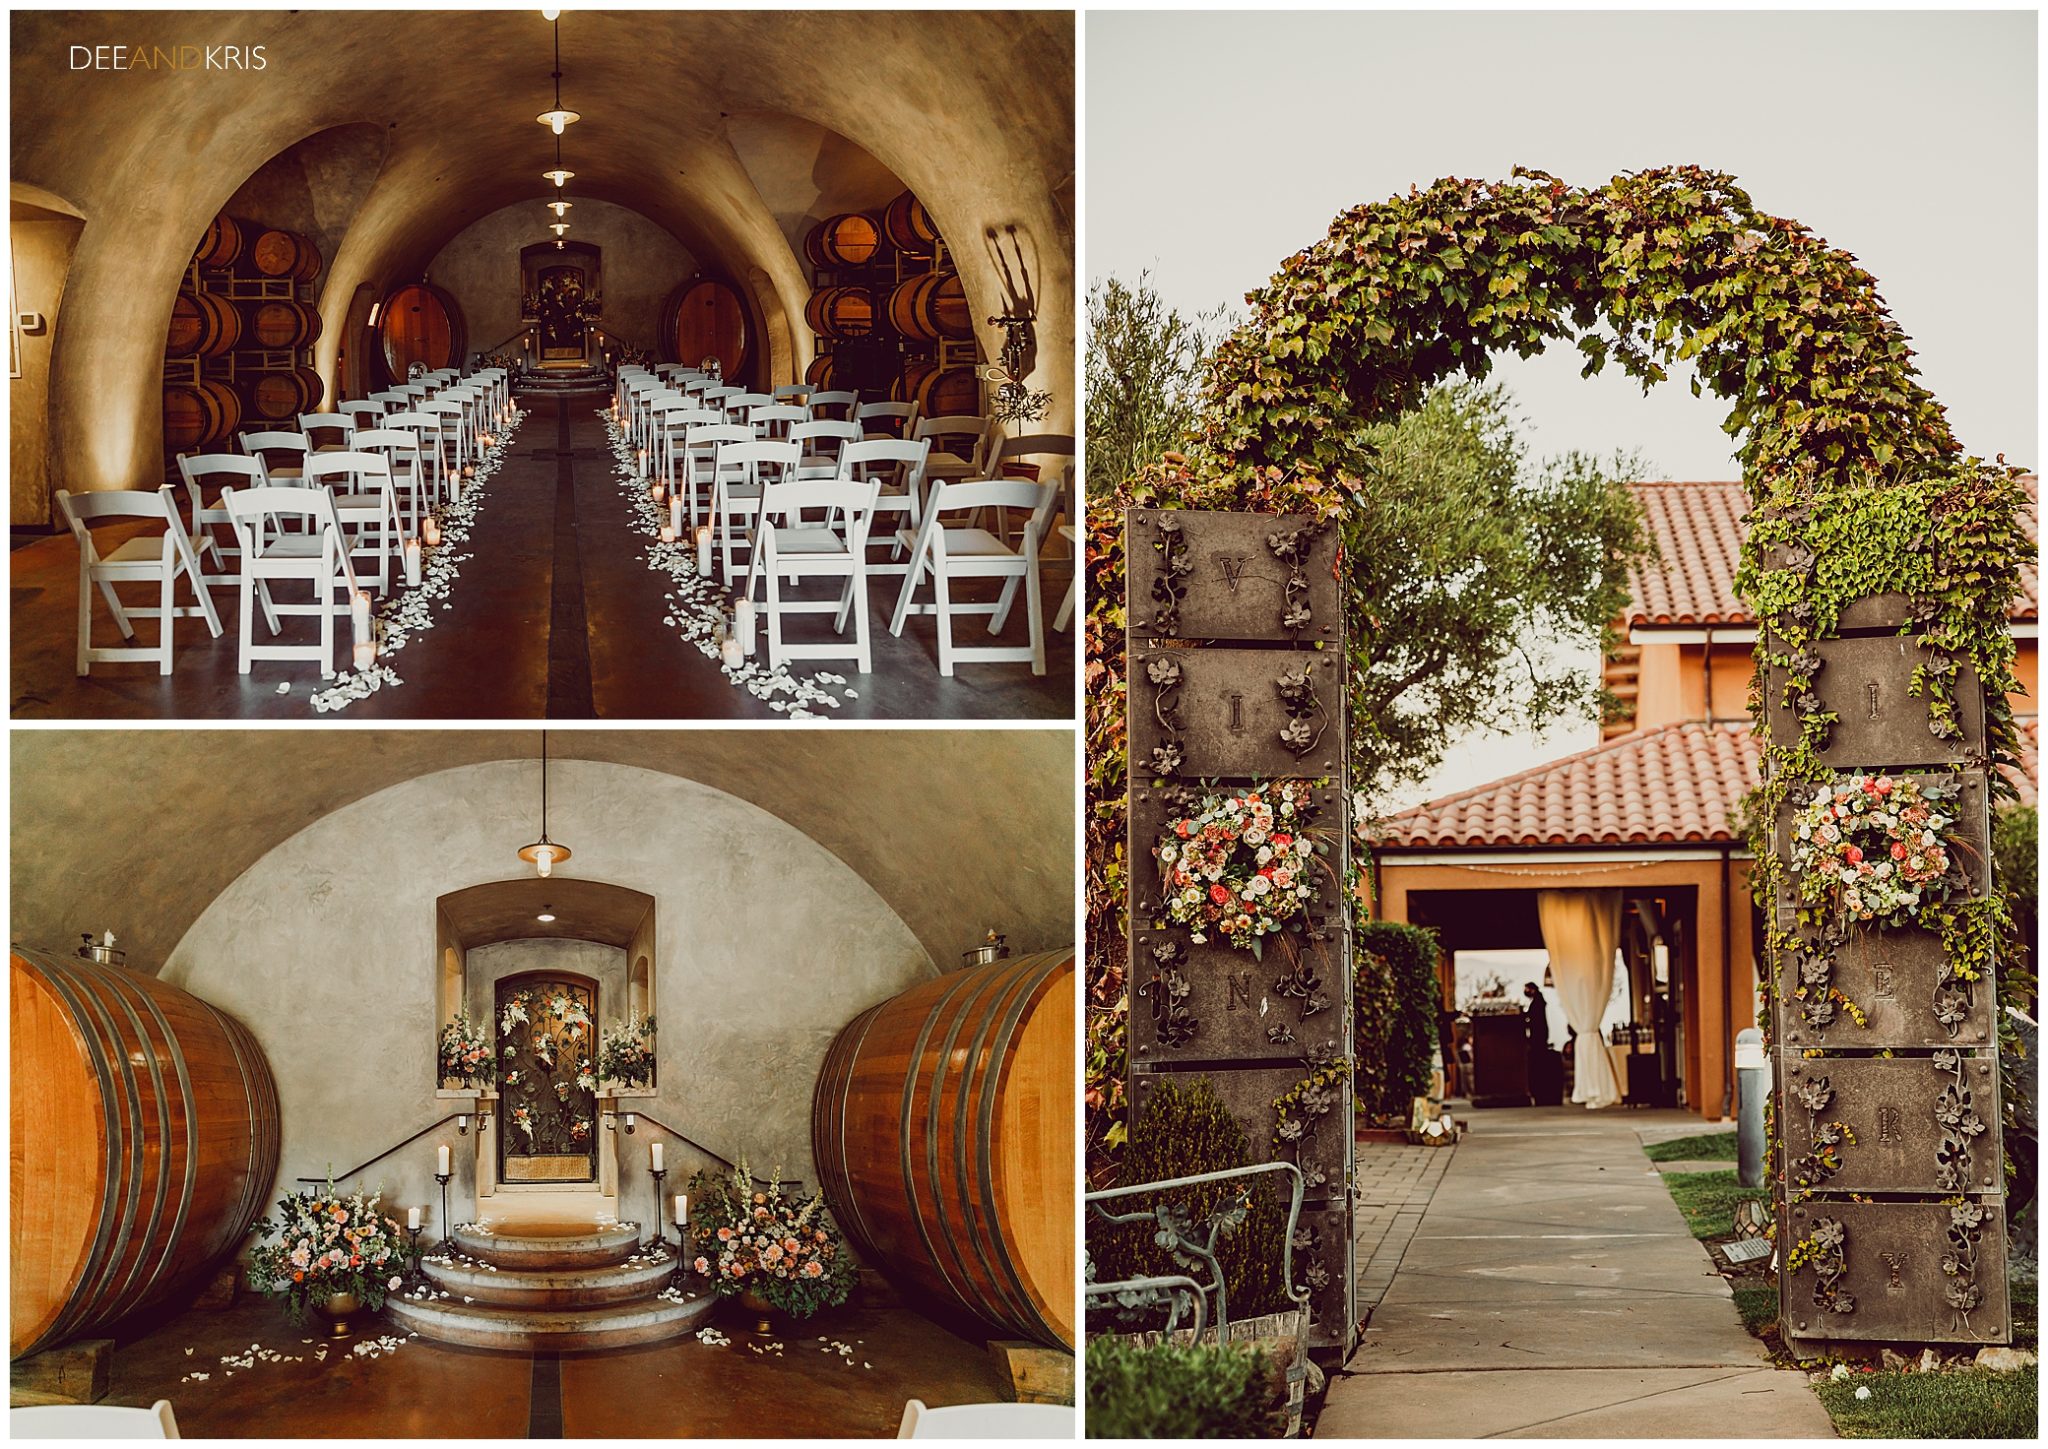  Wedding Venues Napa Ca in the world The ultimate guide 